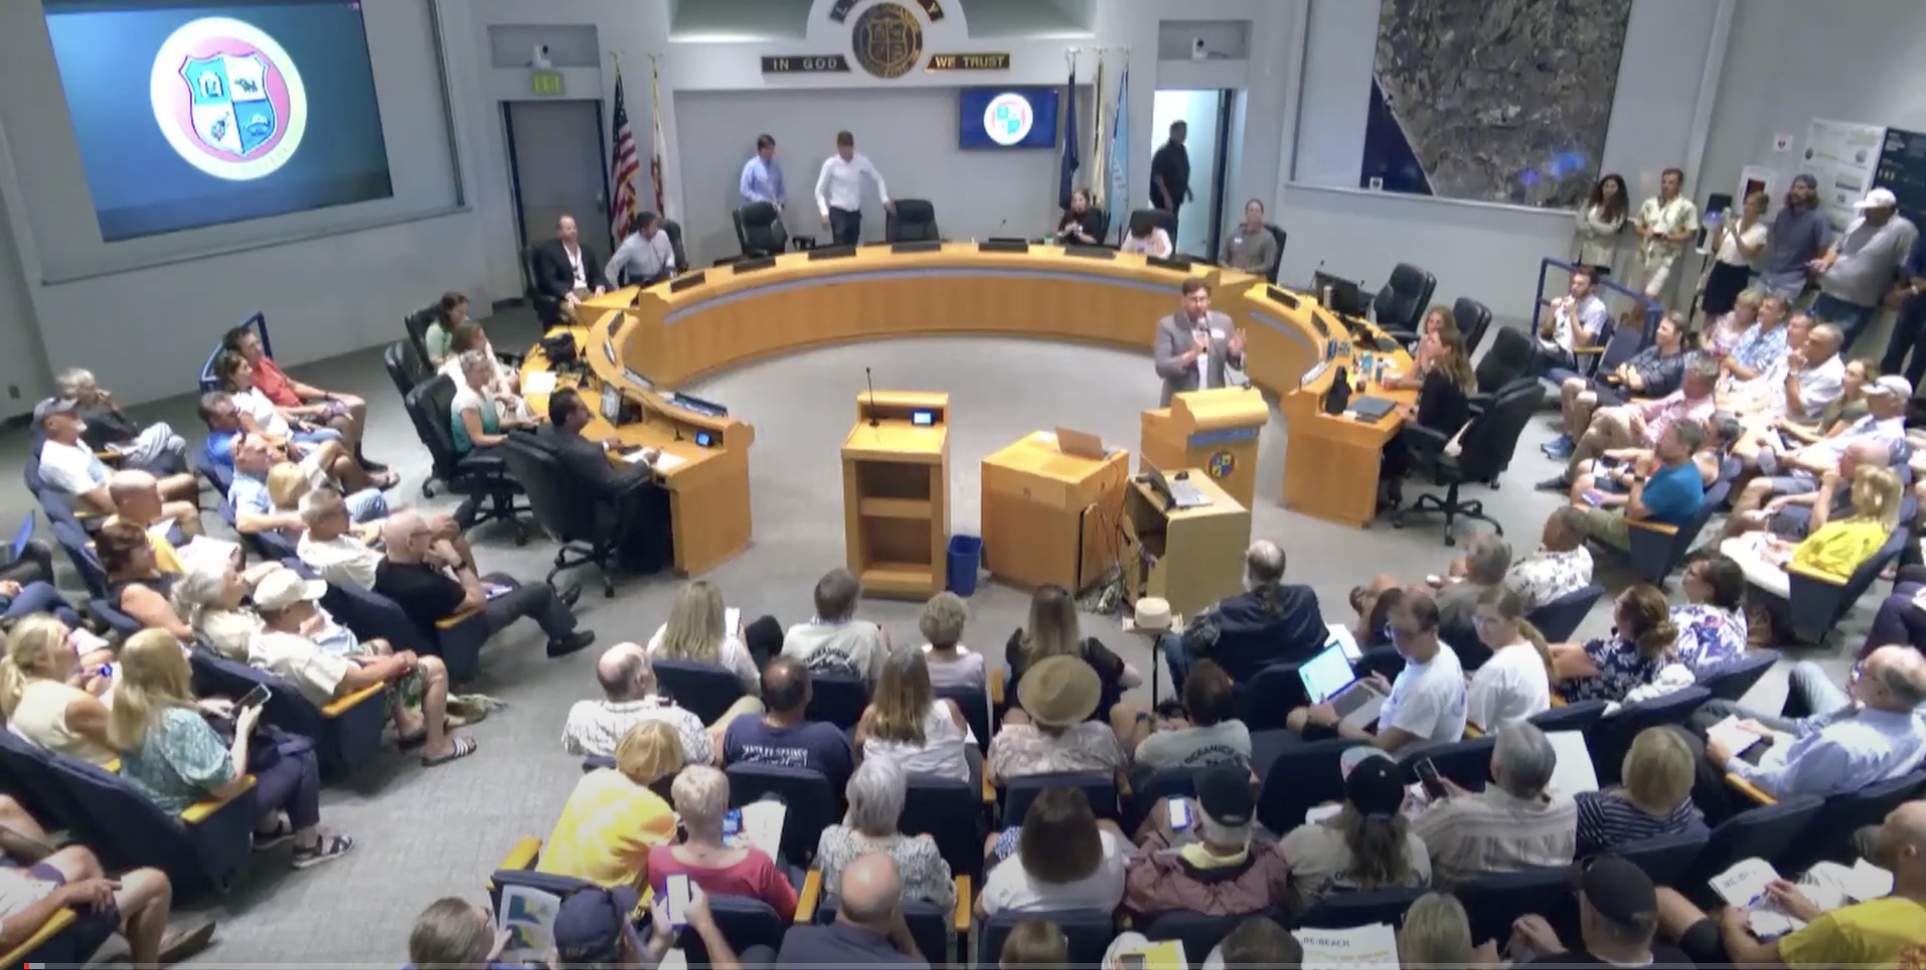 Attendees packed the city council chambers 